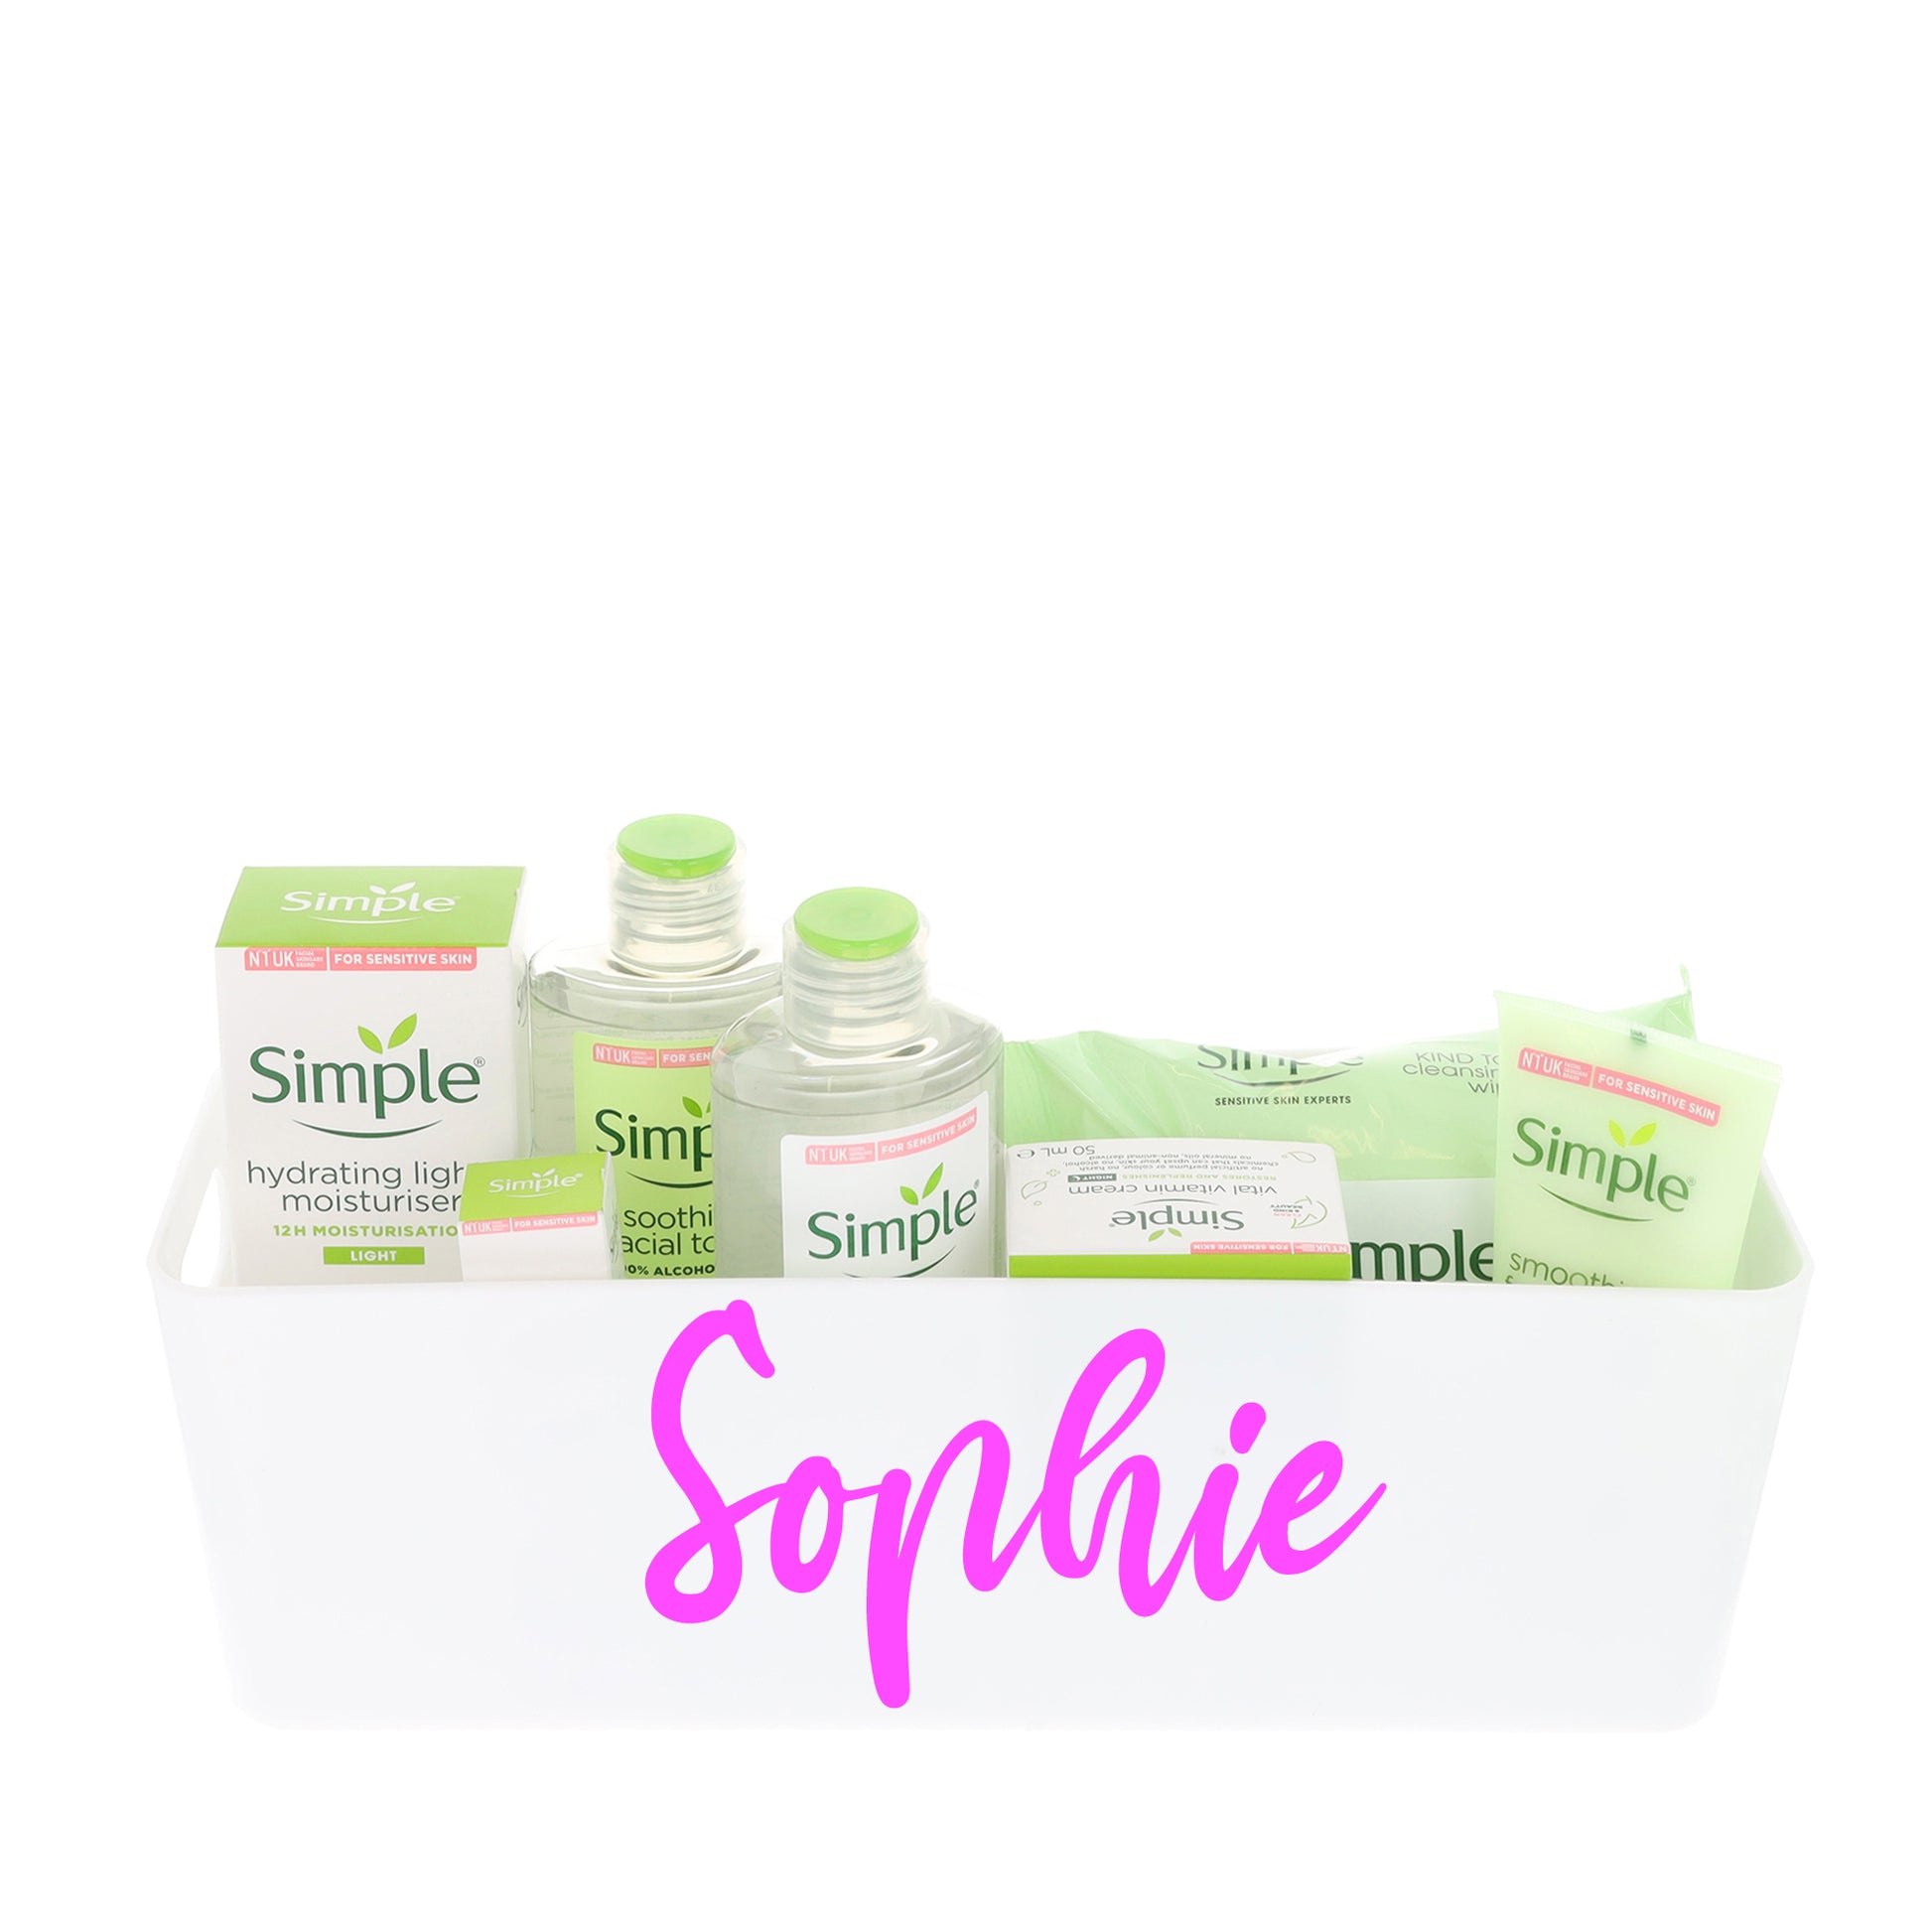 Simple Skincare Filled Personalised Storage Gift Box  - Always Looking Good - Large White 